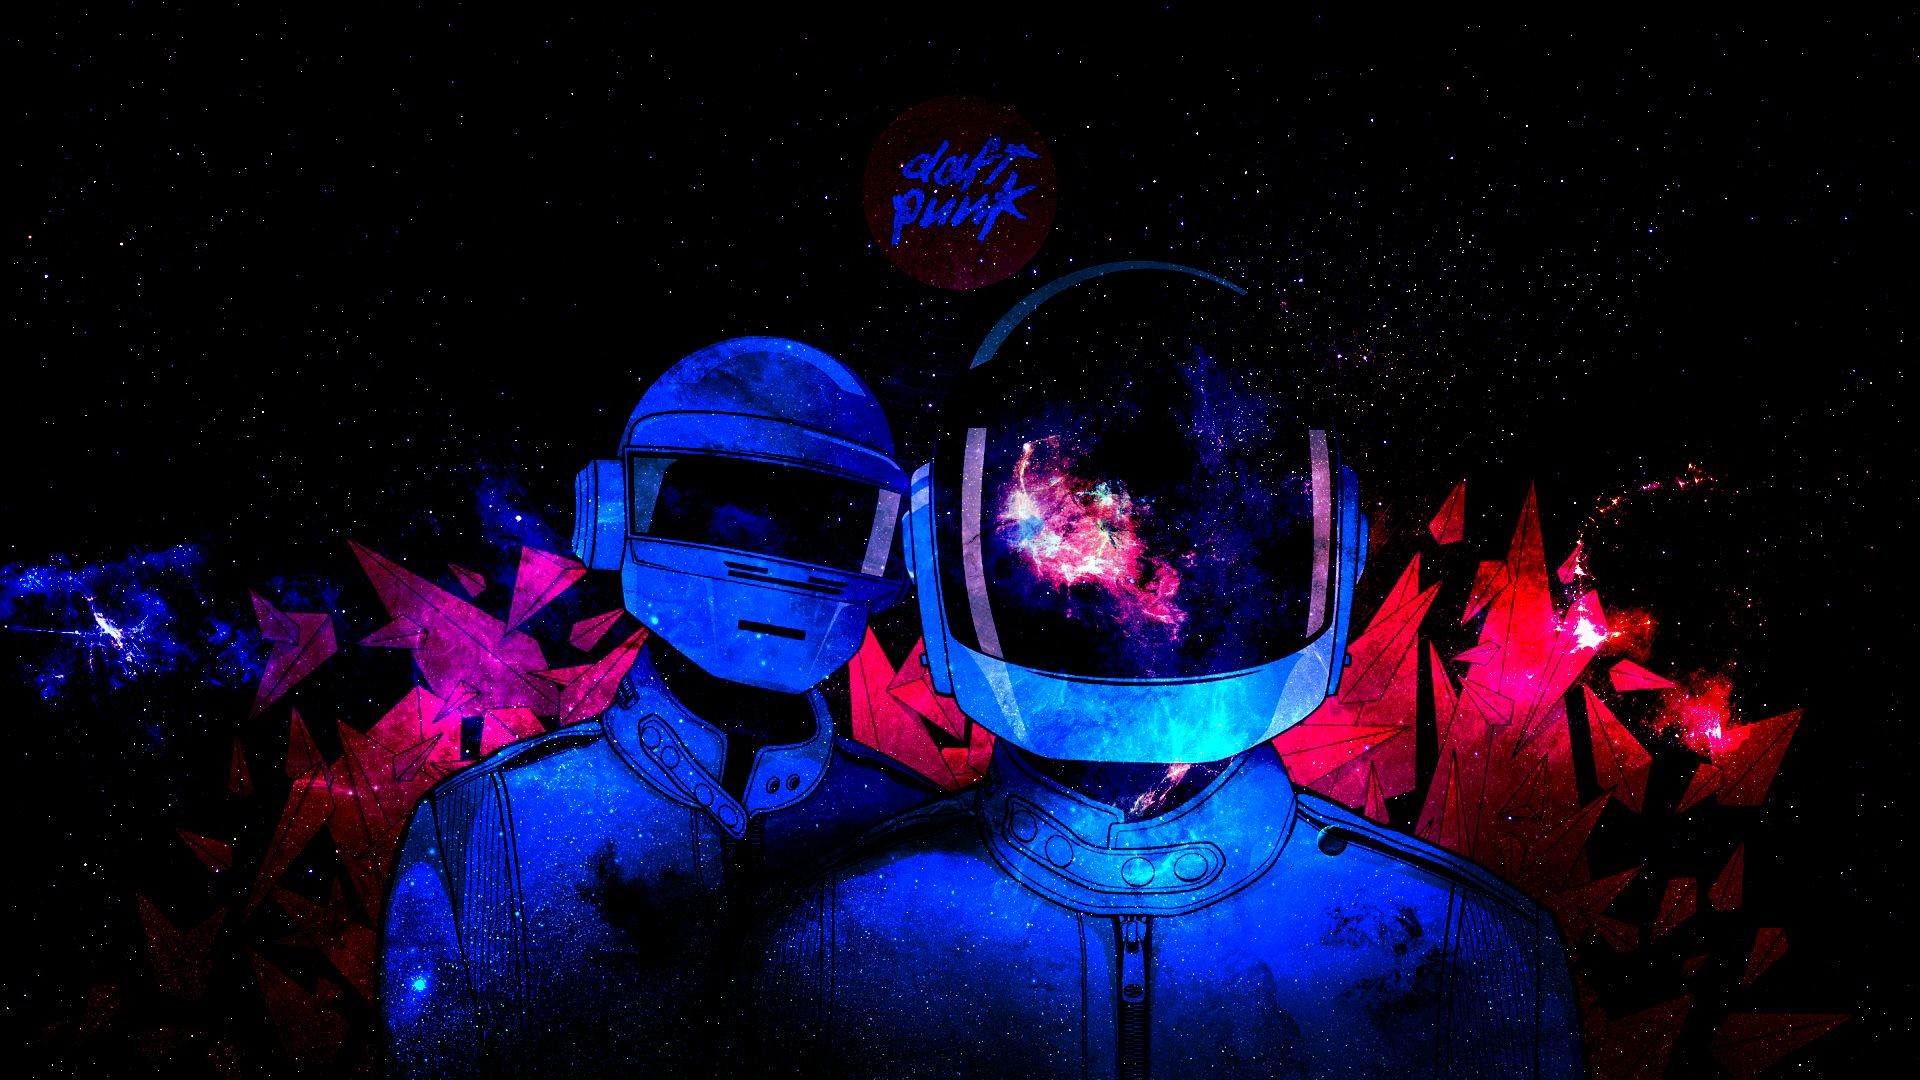 Daft Punk Wallpapers High Quality Download Free HD Wallpapers Pinterest Daft punk, Hd wallpaper and Wallpaper